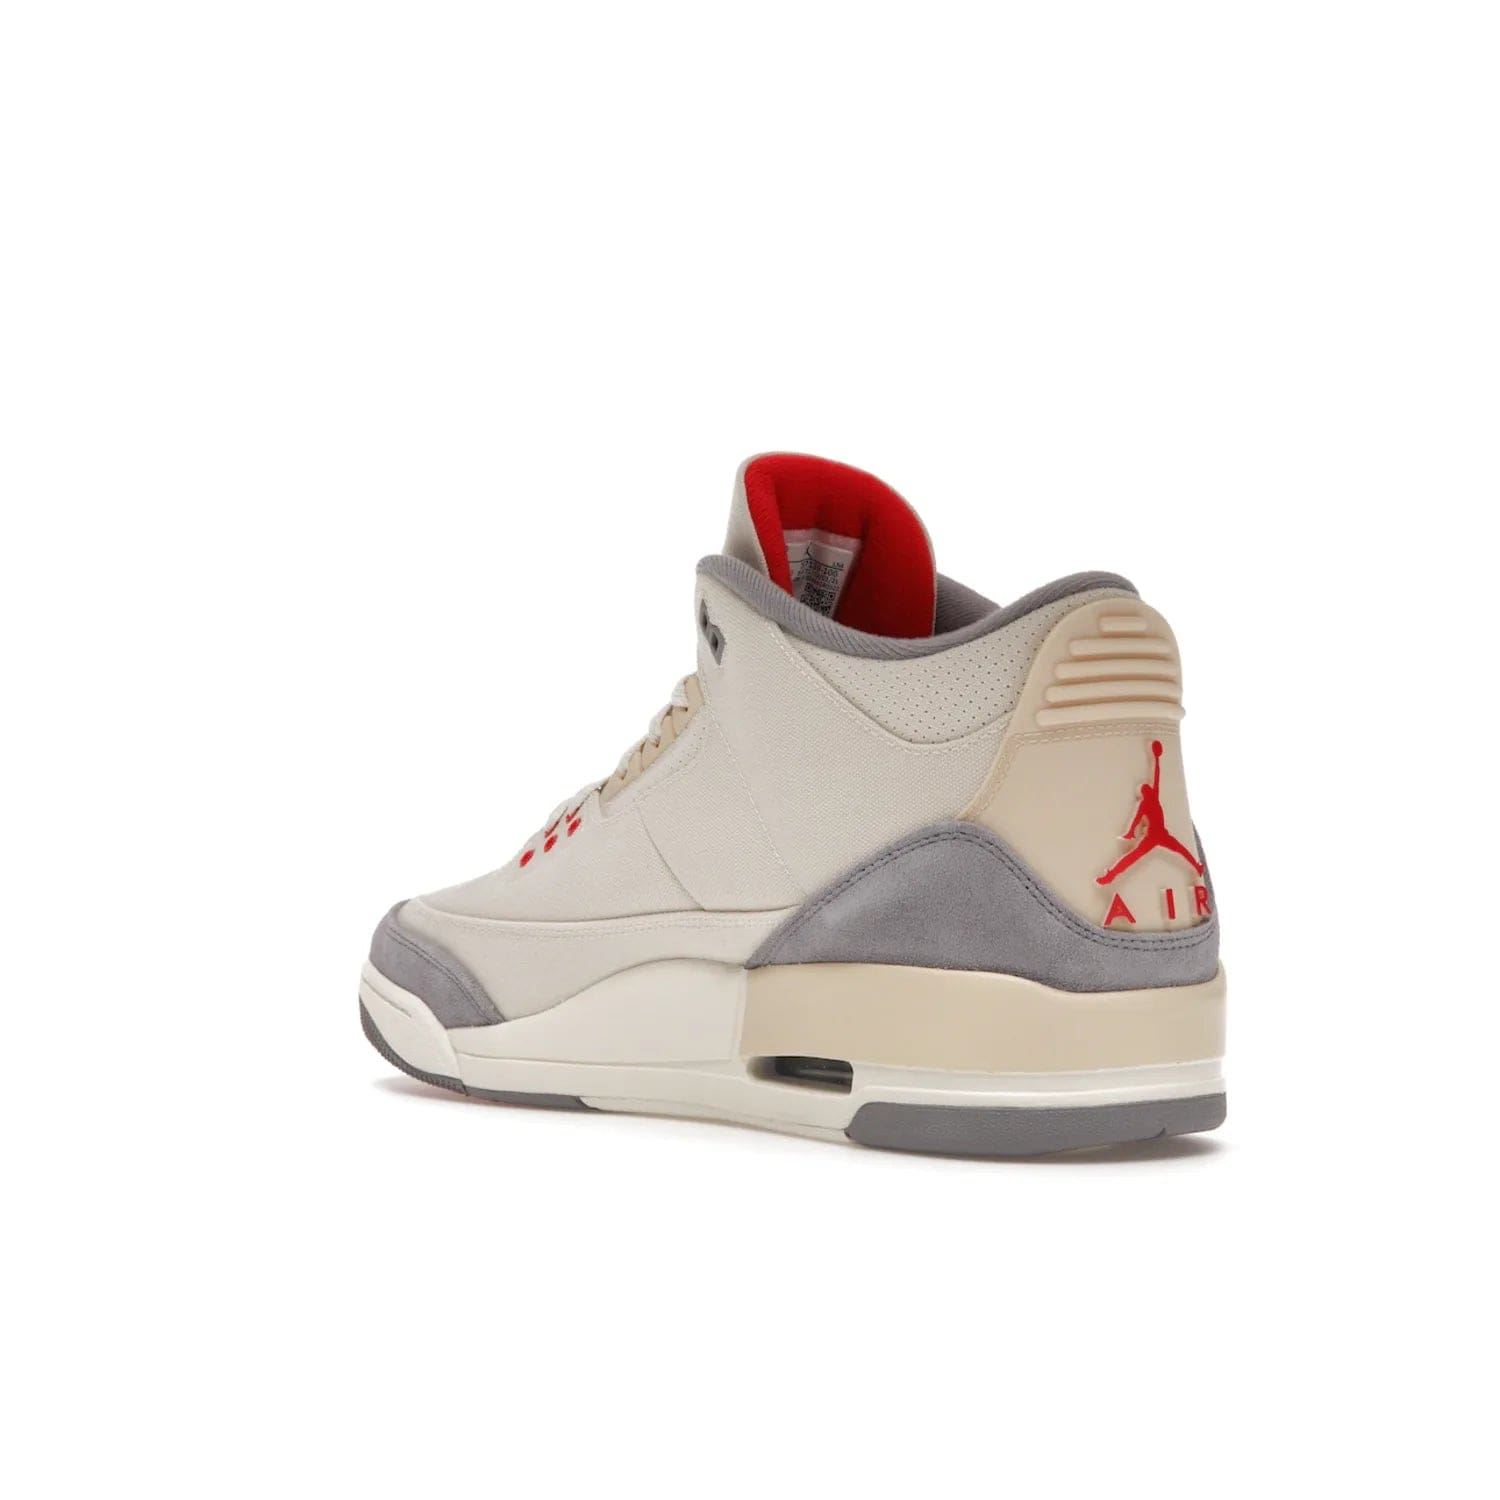 Jordan 3 Retro Muslin - Image 24 - Only at www.BallersClubKickz.com - Eye-catching Air Jordan 3 Retro Muslin in a neutral palette of grey, cream, and red. Featuring canvas upper, suede overlays and white/grey Air Max sole. Available in March 2022.